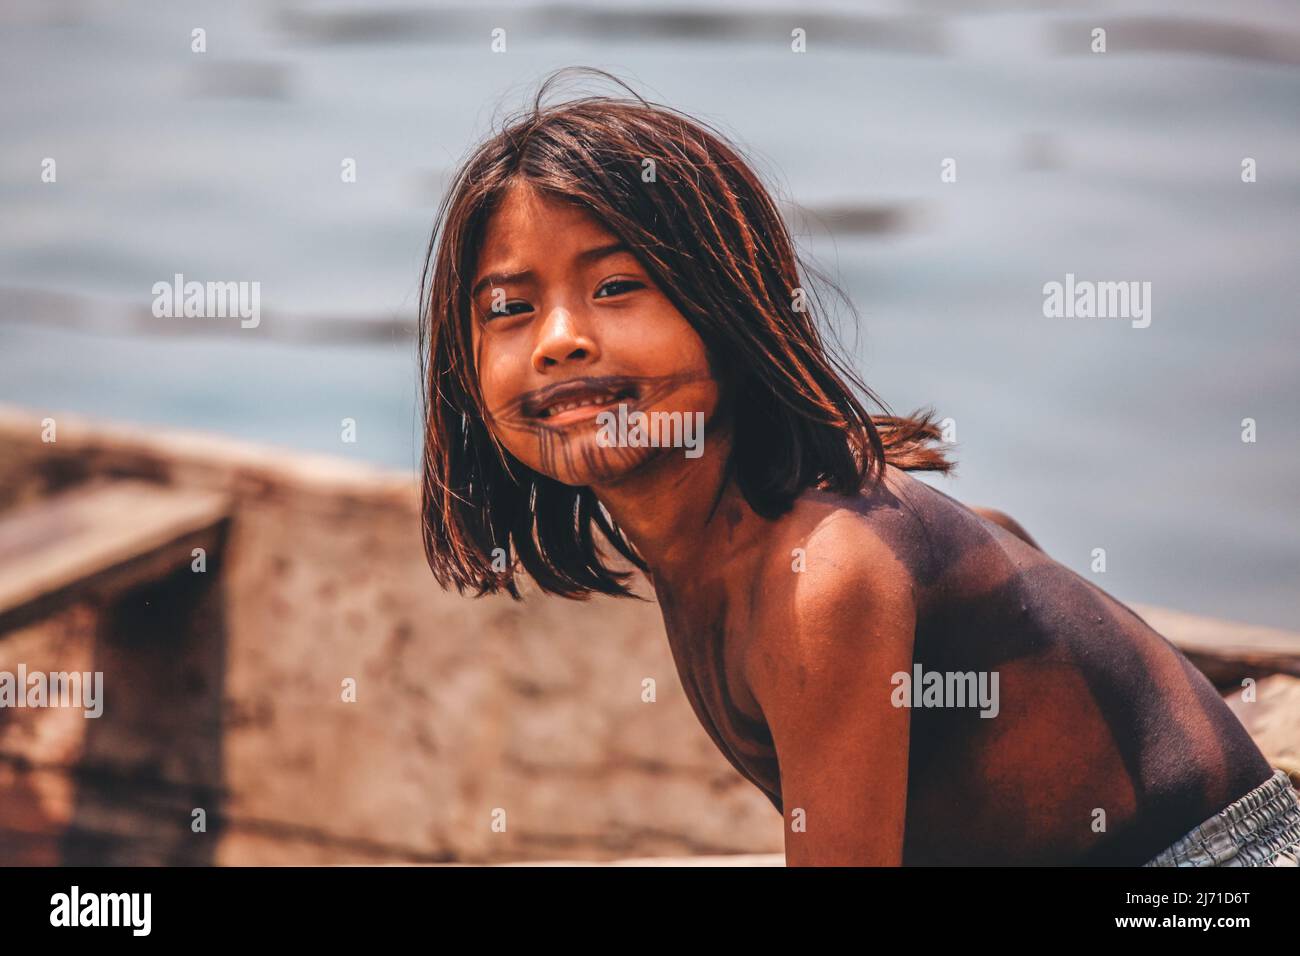 Indian boy smiling to the camera by the Amazon River in Brazil, Baixo Amazonas, 2010. Stock Photo